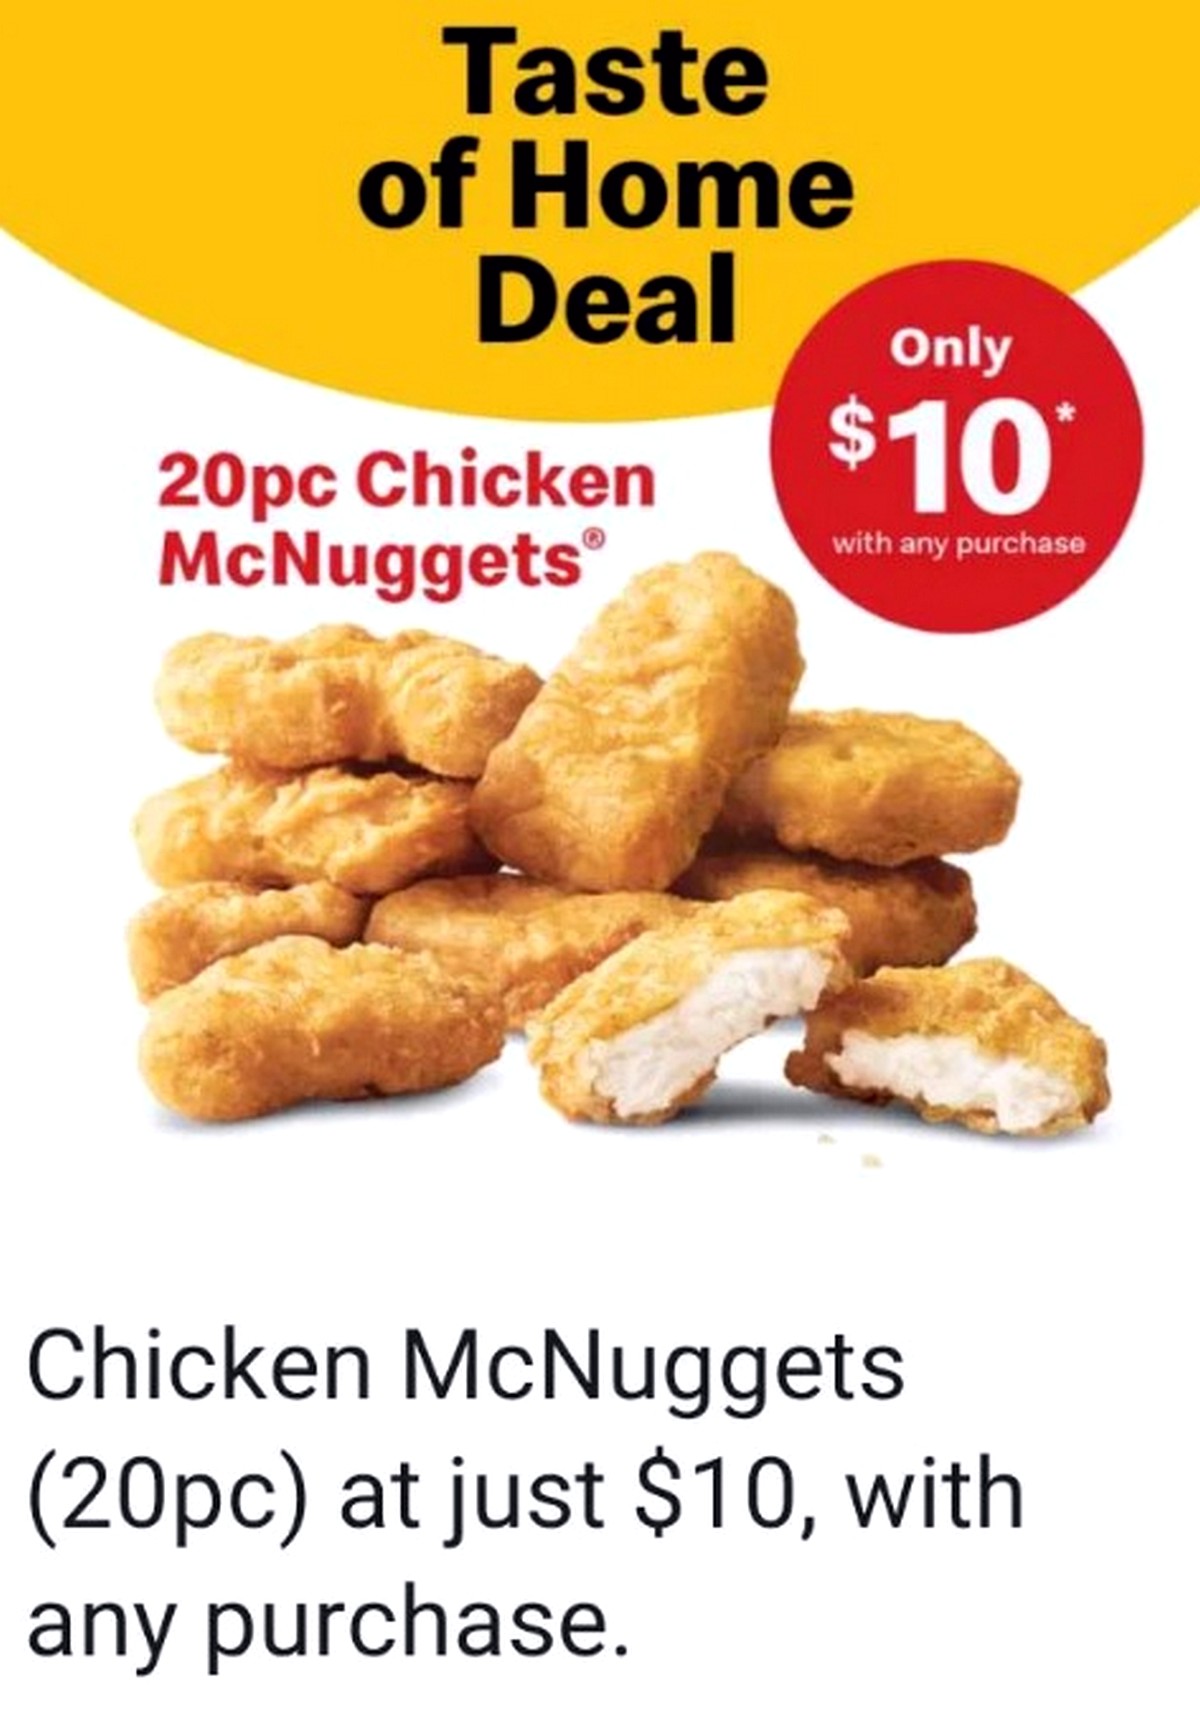 mcd-mcnuggets-20pc-deal-Singapore-APP-Deals 29 Aug 2020: McDonald's 1 Day Chicken McNuggets Promotion! $10 for 20pcs with any purchase!